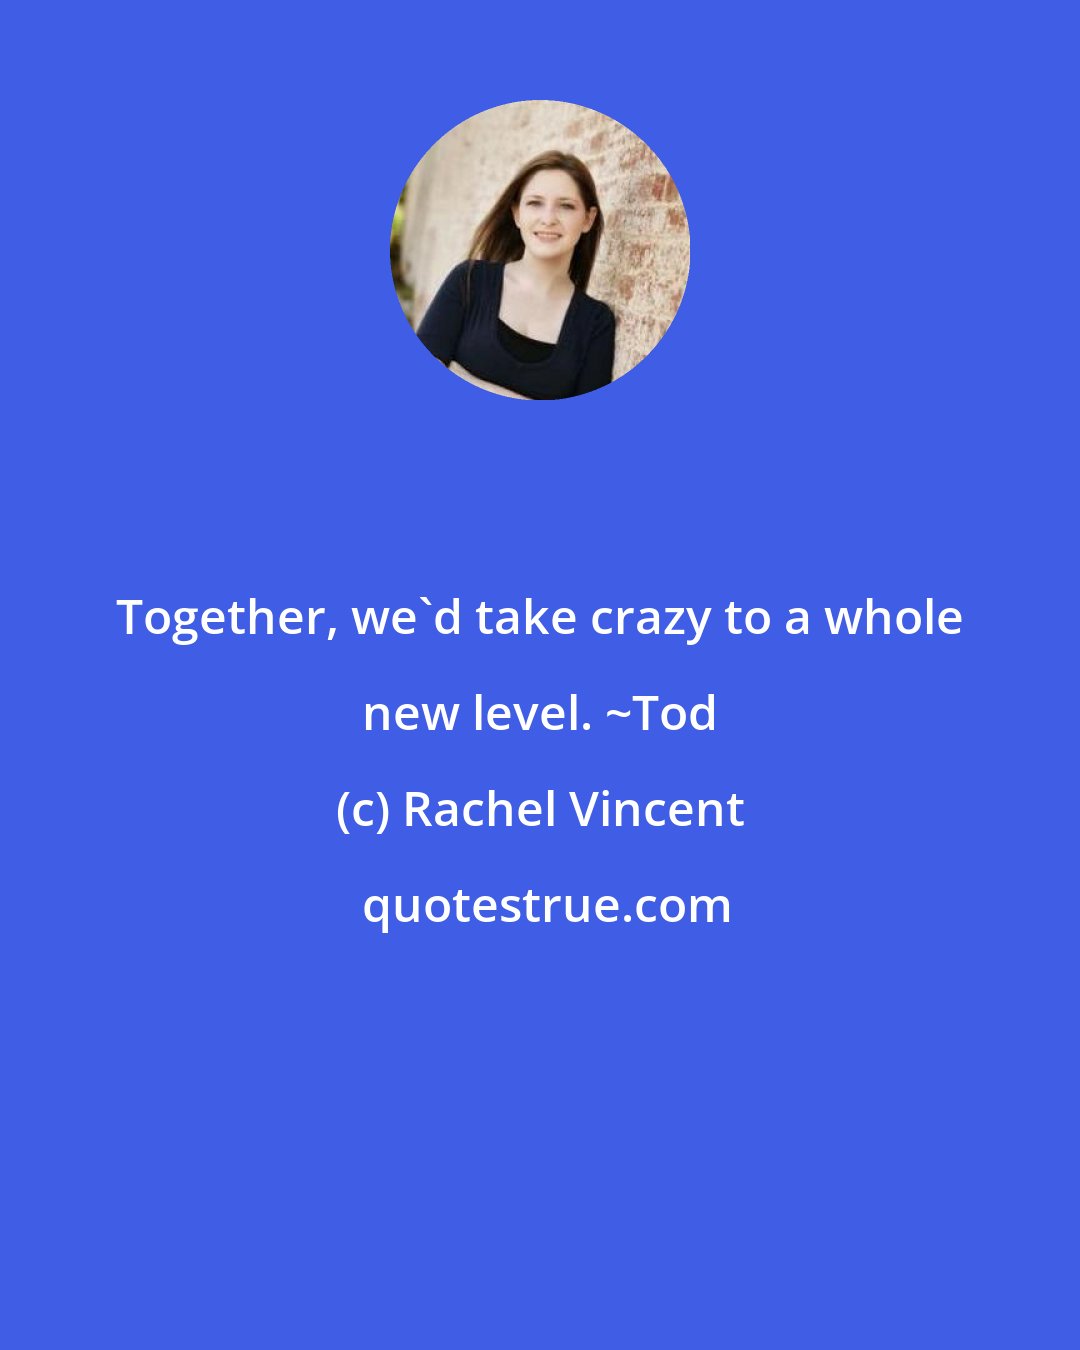 Rachel Vincent: Together, we'd take crazy to a whole new level. ~Tod